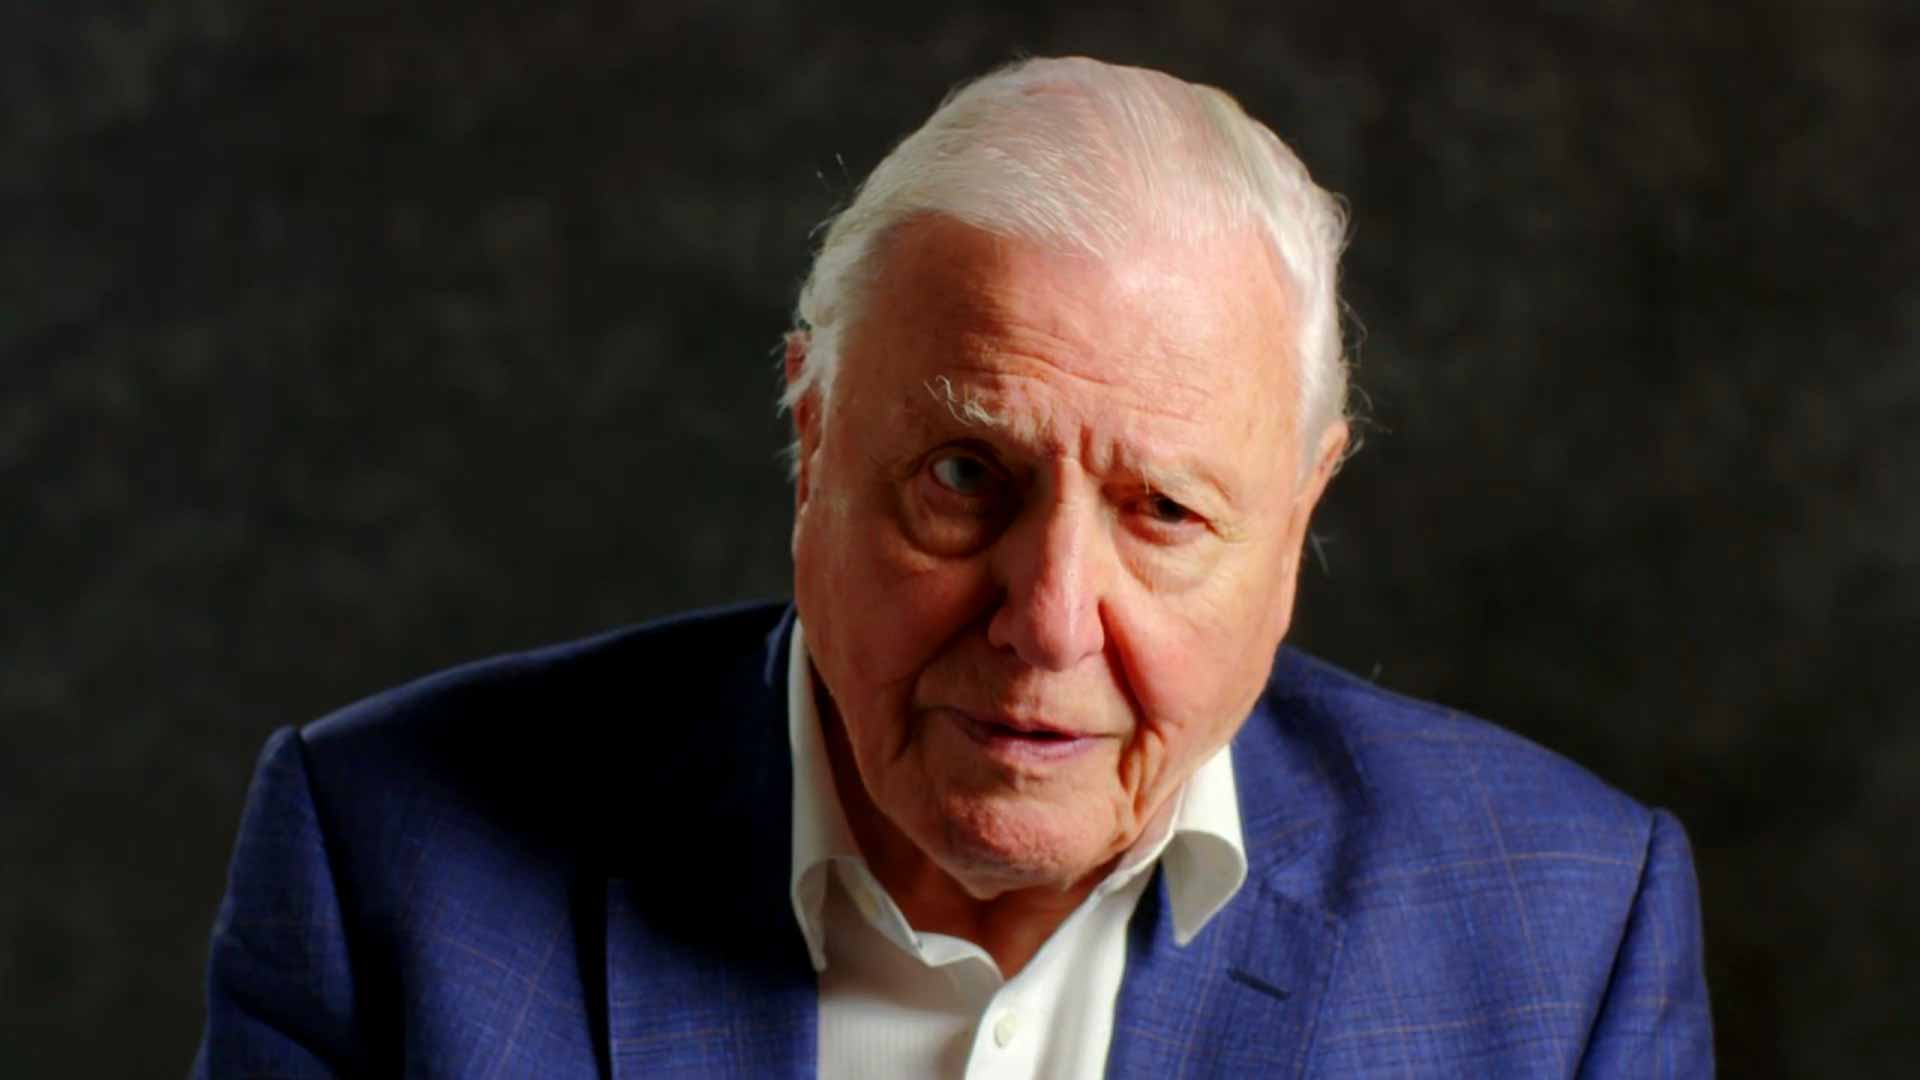 Sir David Attenborough message to World Leaders to save our planet